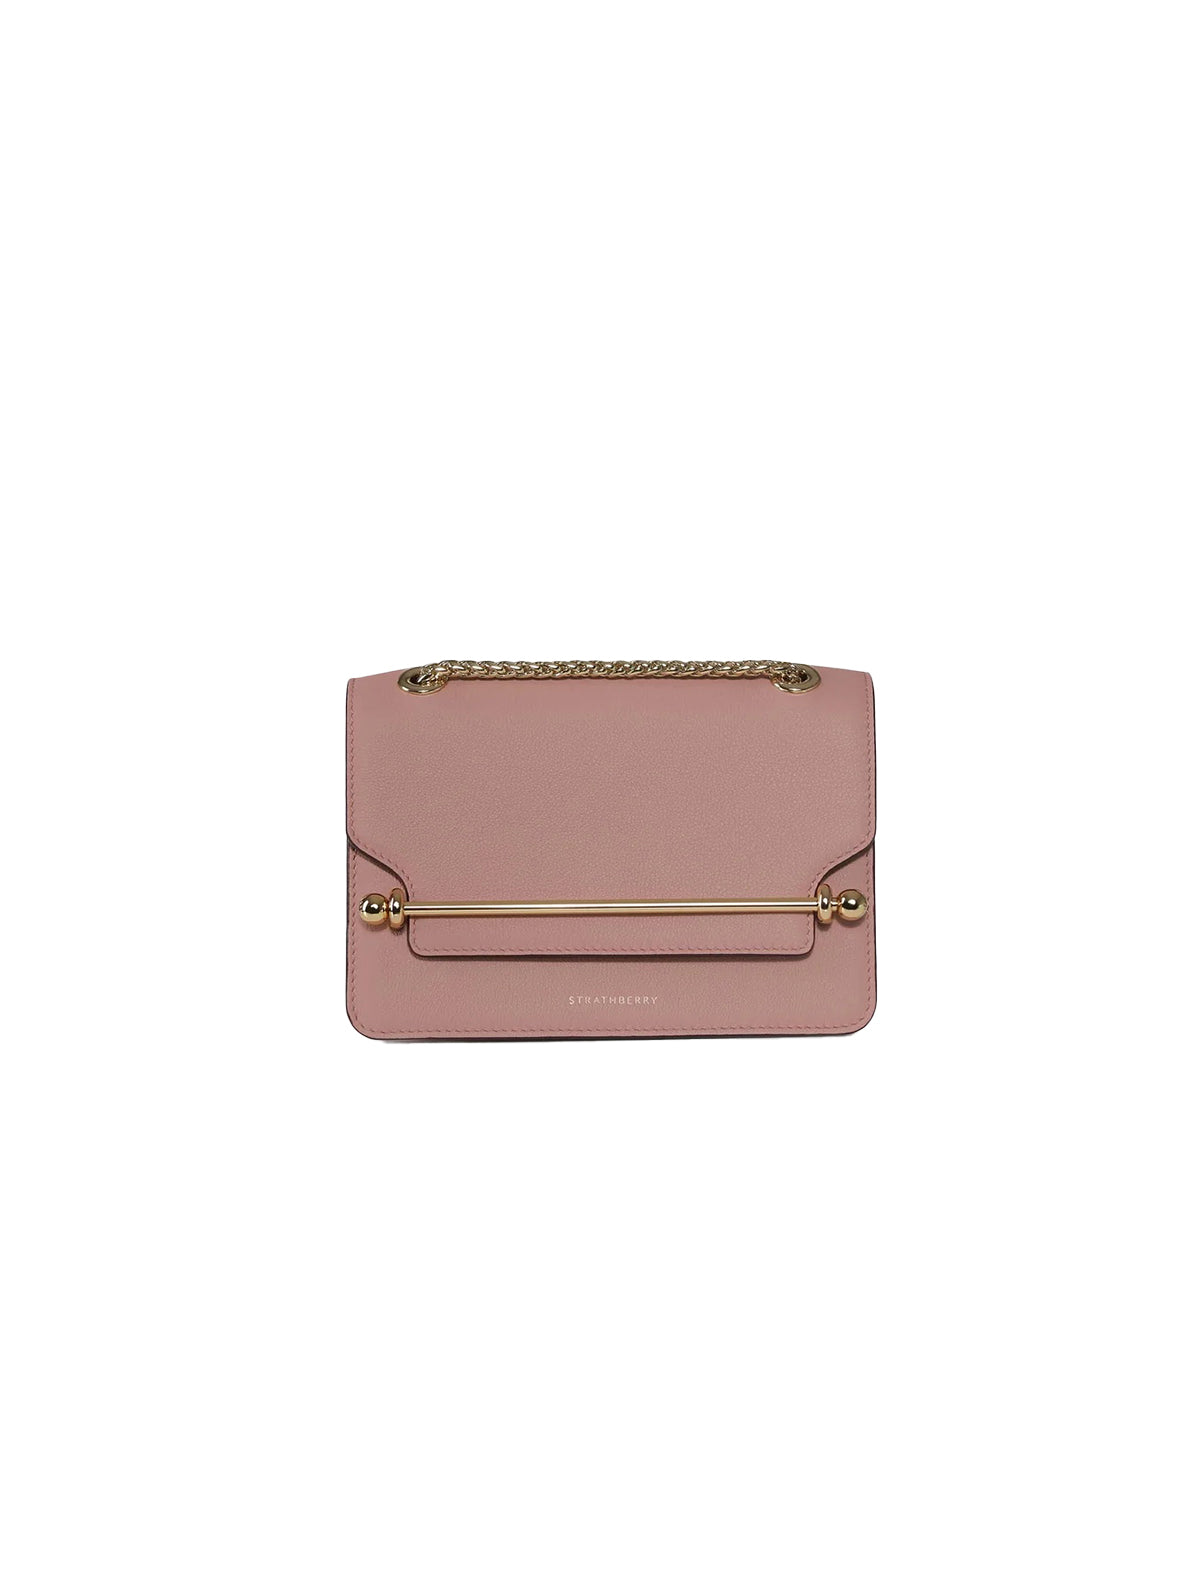 STRATHBERRY East/West Mini Bag in Blush Rose